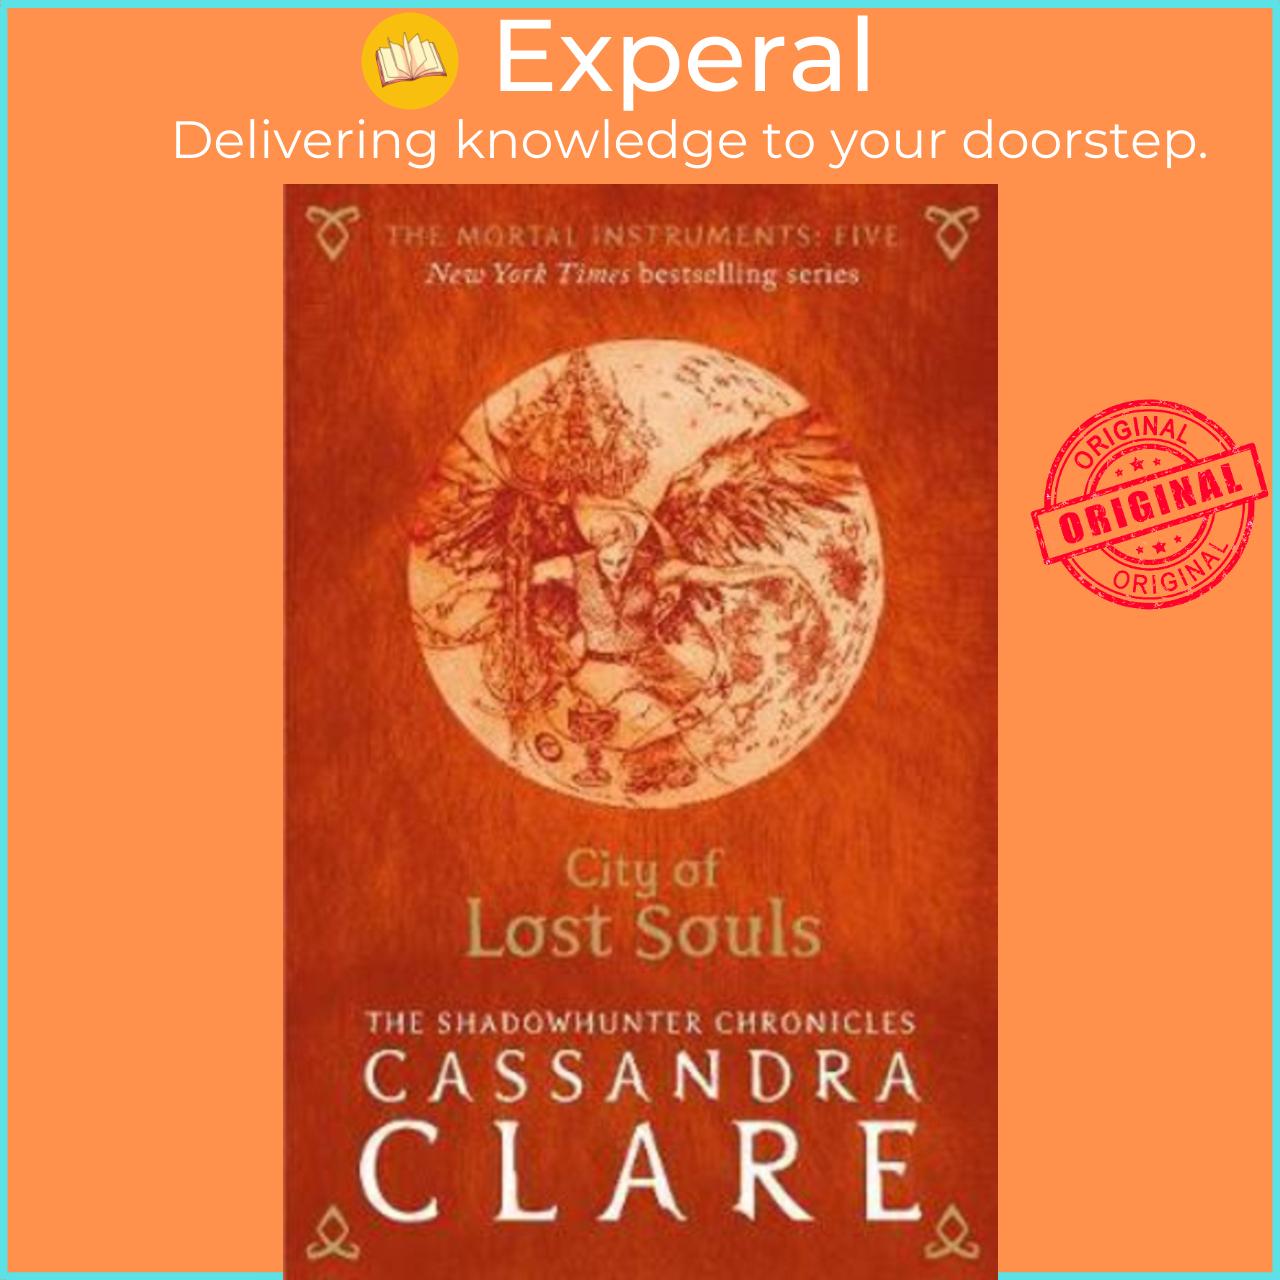 Sách - The Mortal Instruments 5: City of Lost Souls by Cassandra Clare (UK edition, paperback)